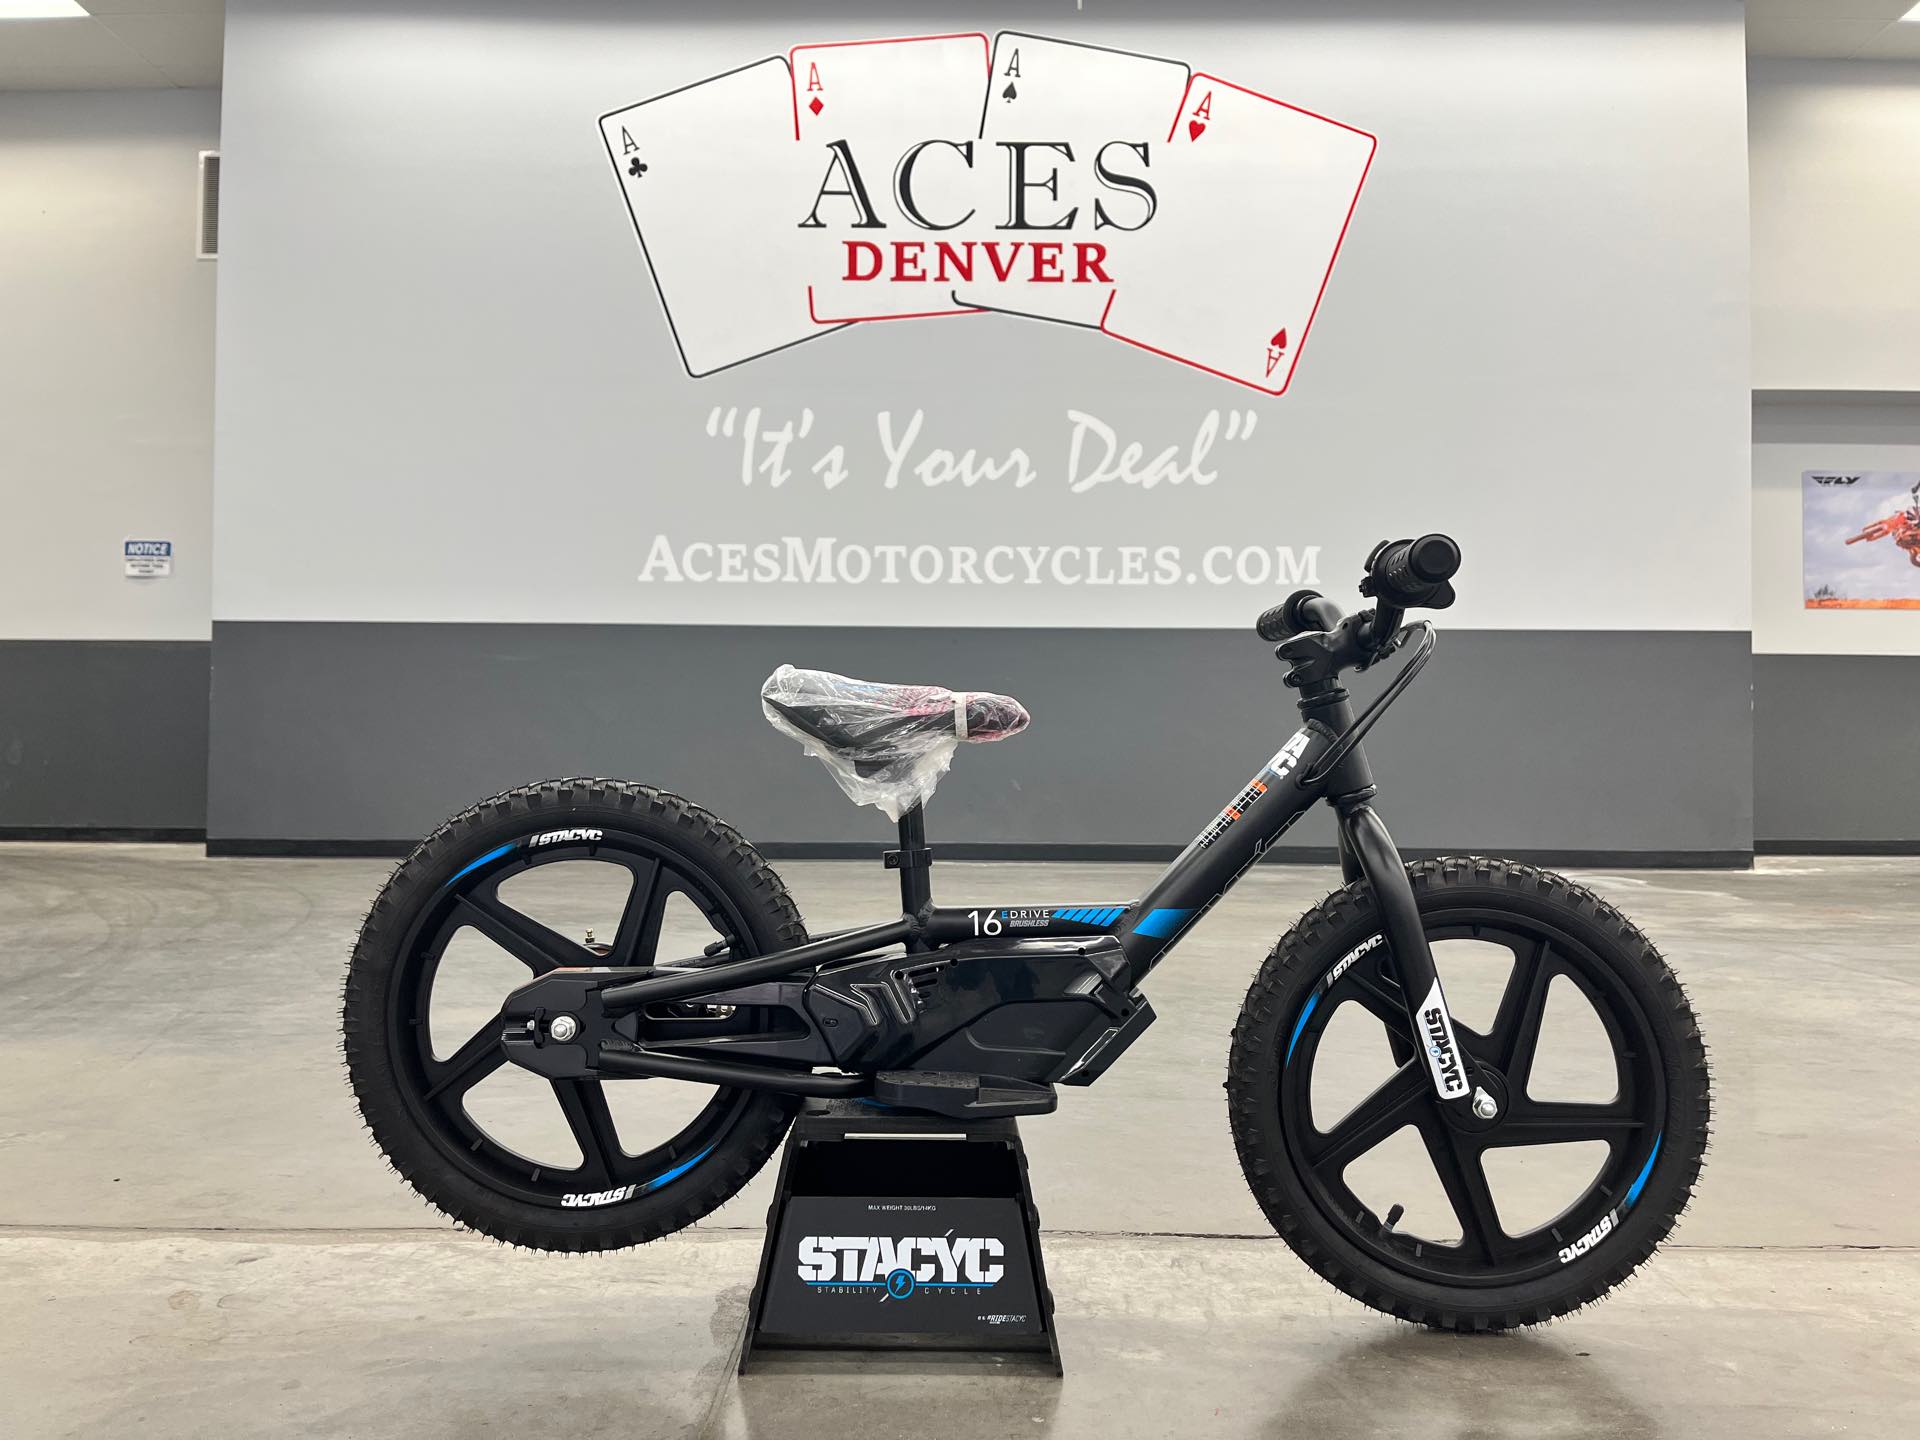 2021 STACYC 16 BRUSHLESS E-DRIVE at Aces Motorcycles - Denver